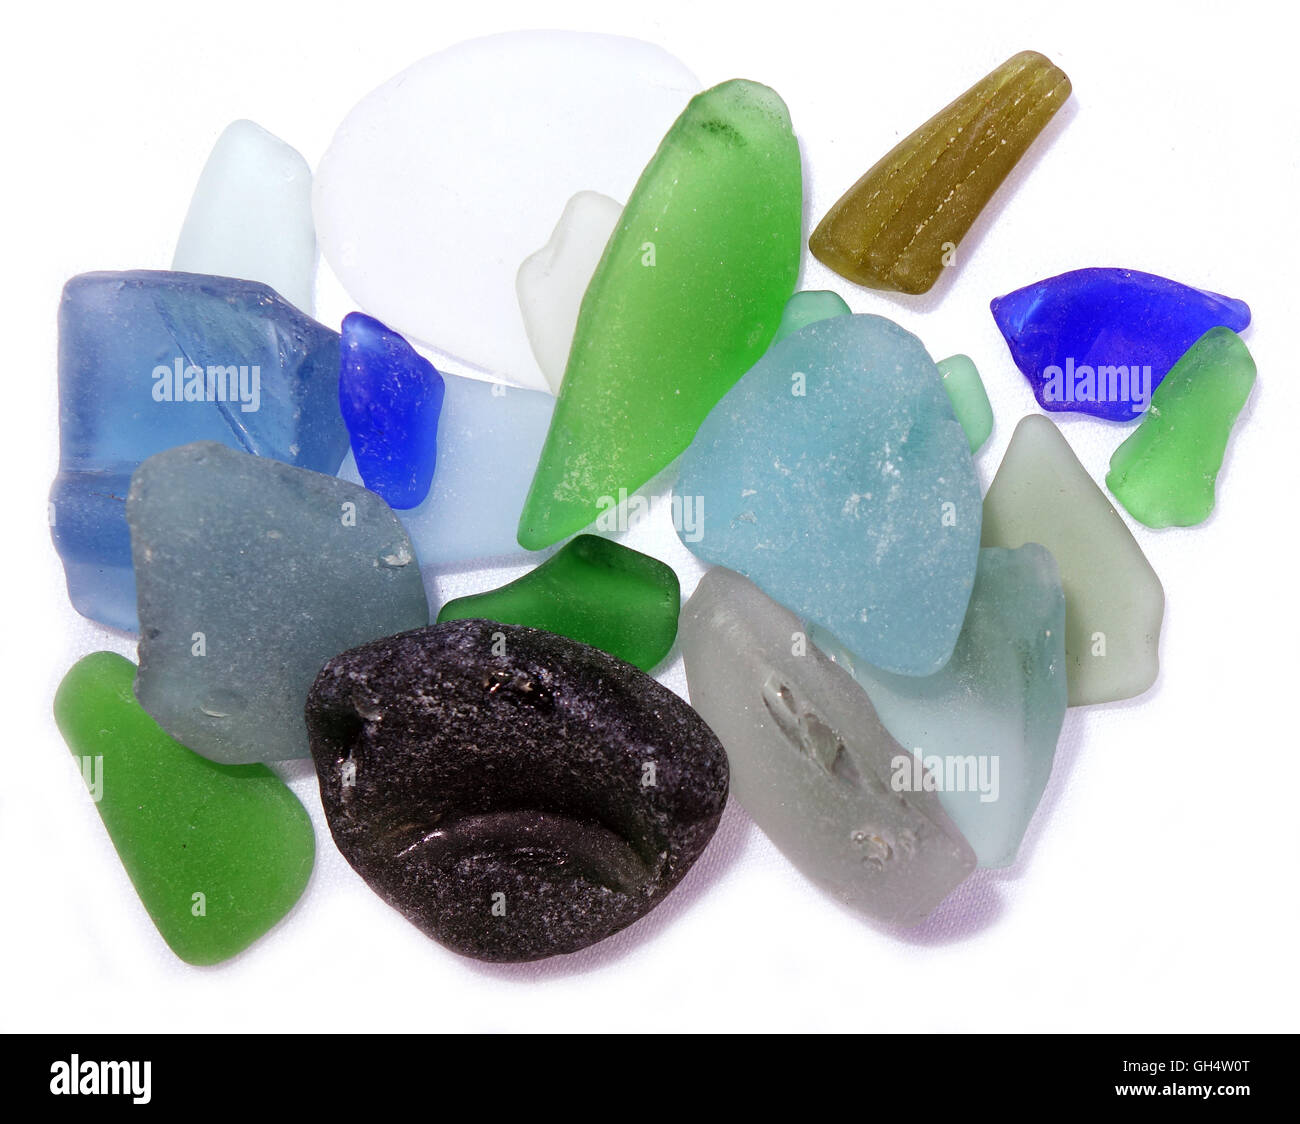 Blue and green seaglass collected at Perth and Fremantle beaches, Western Australia Stock Photo